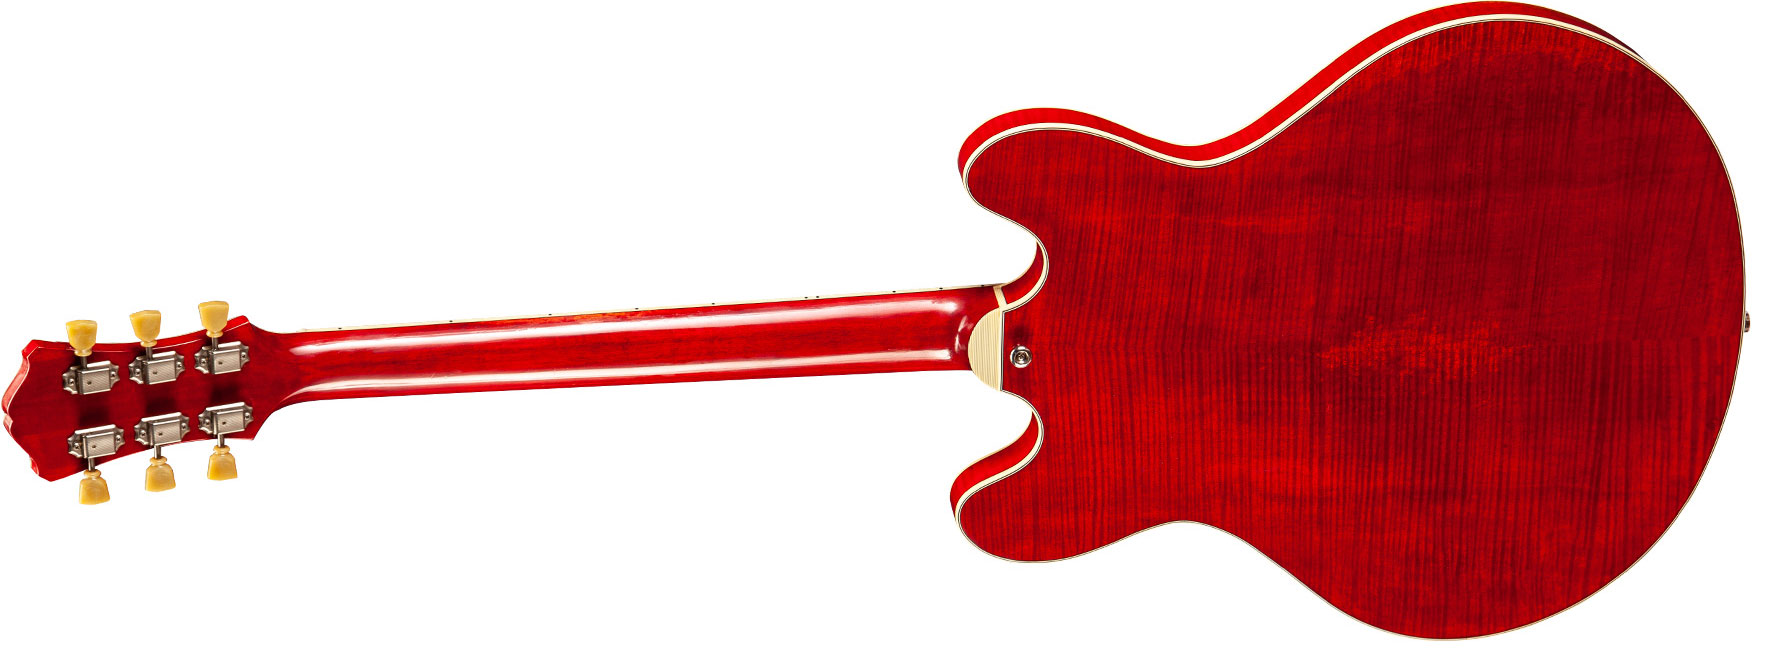 Eastman T59v Thinline Laminate Hh Lollar Ht Eb - Red - Semi-hollow electric guitar - Variation 1